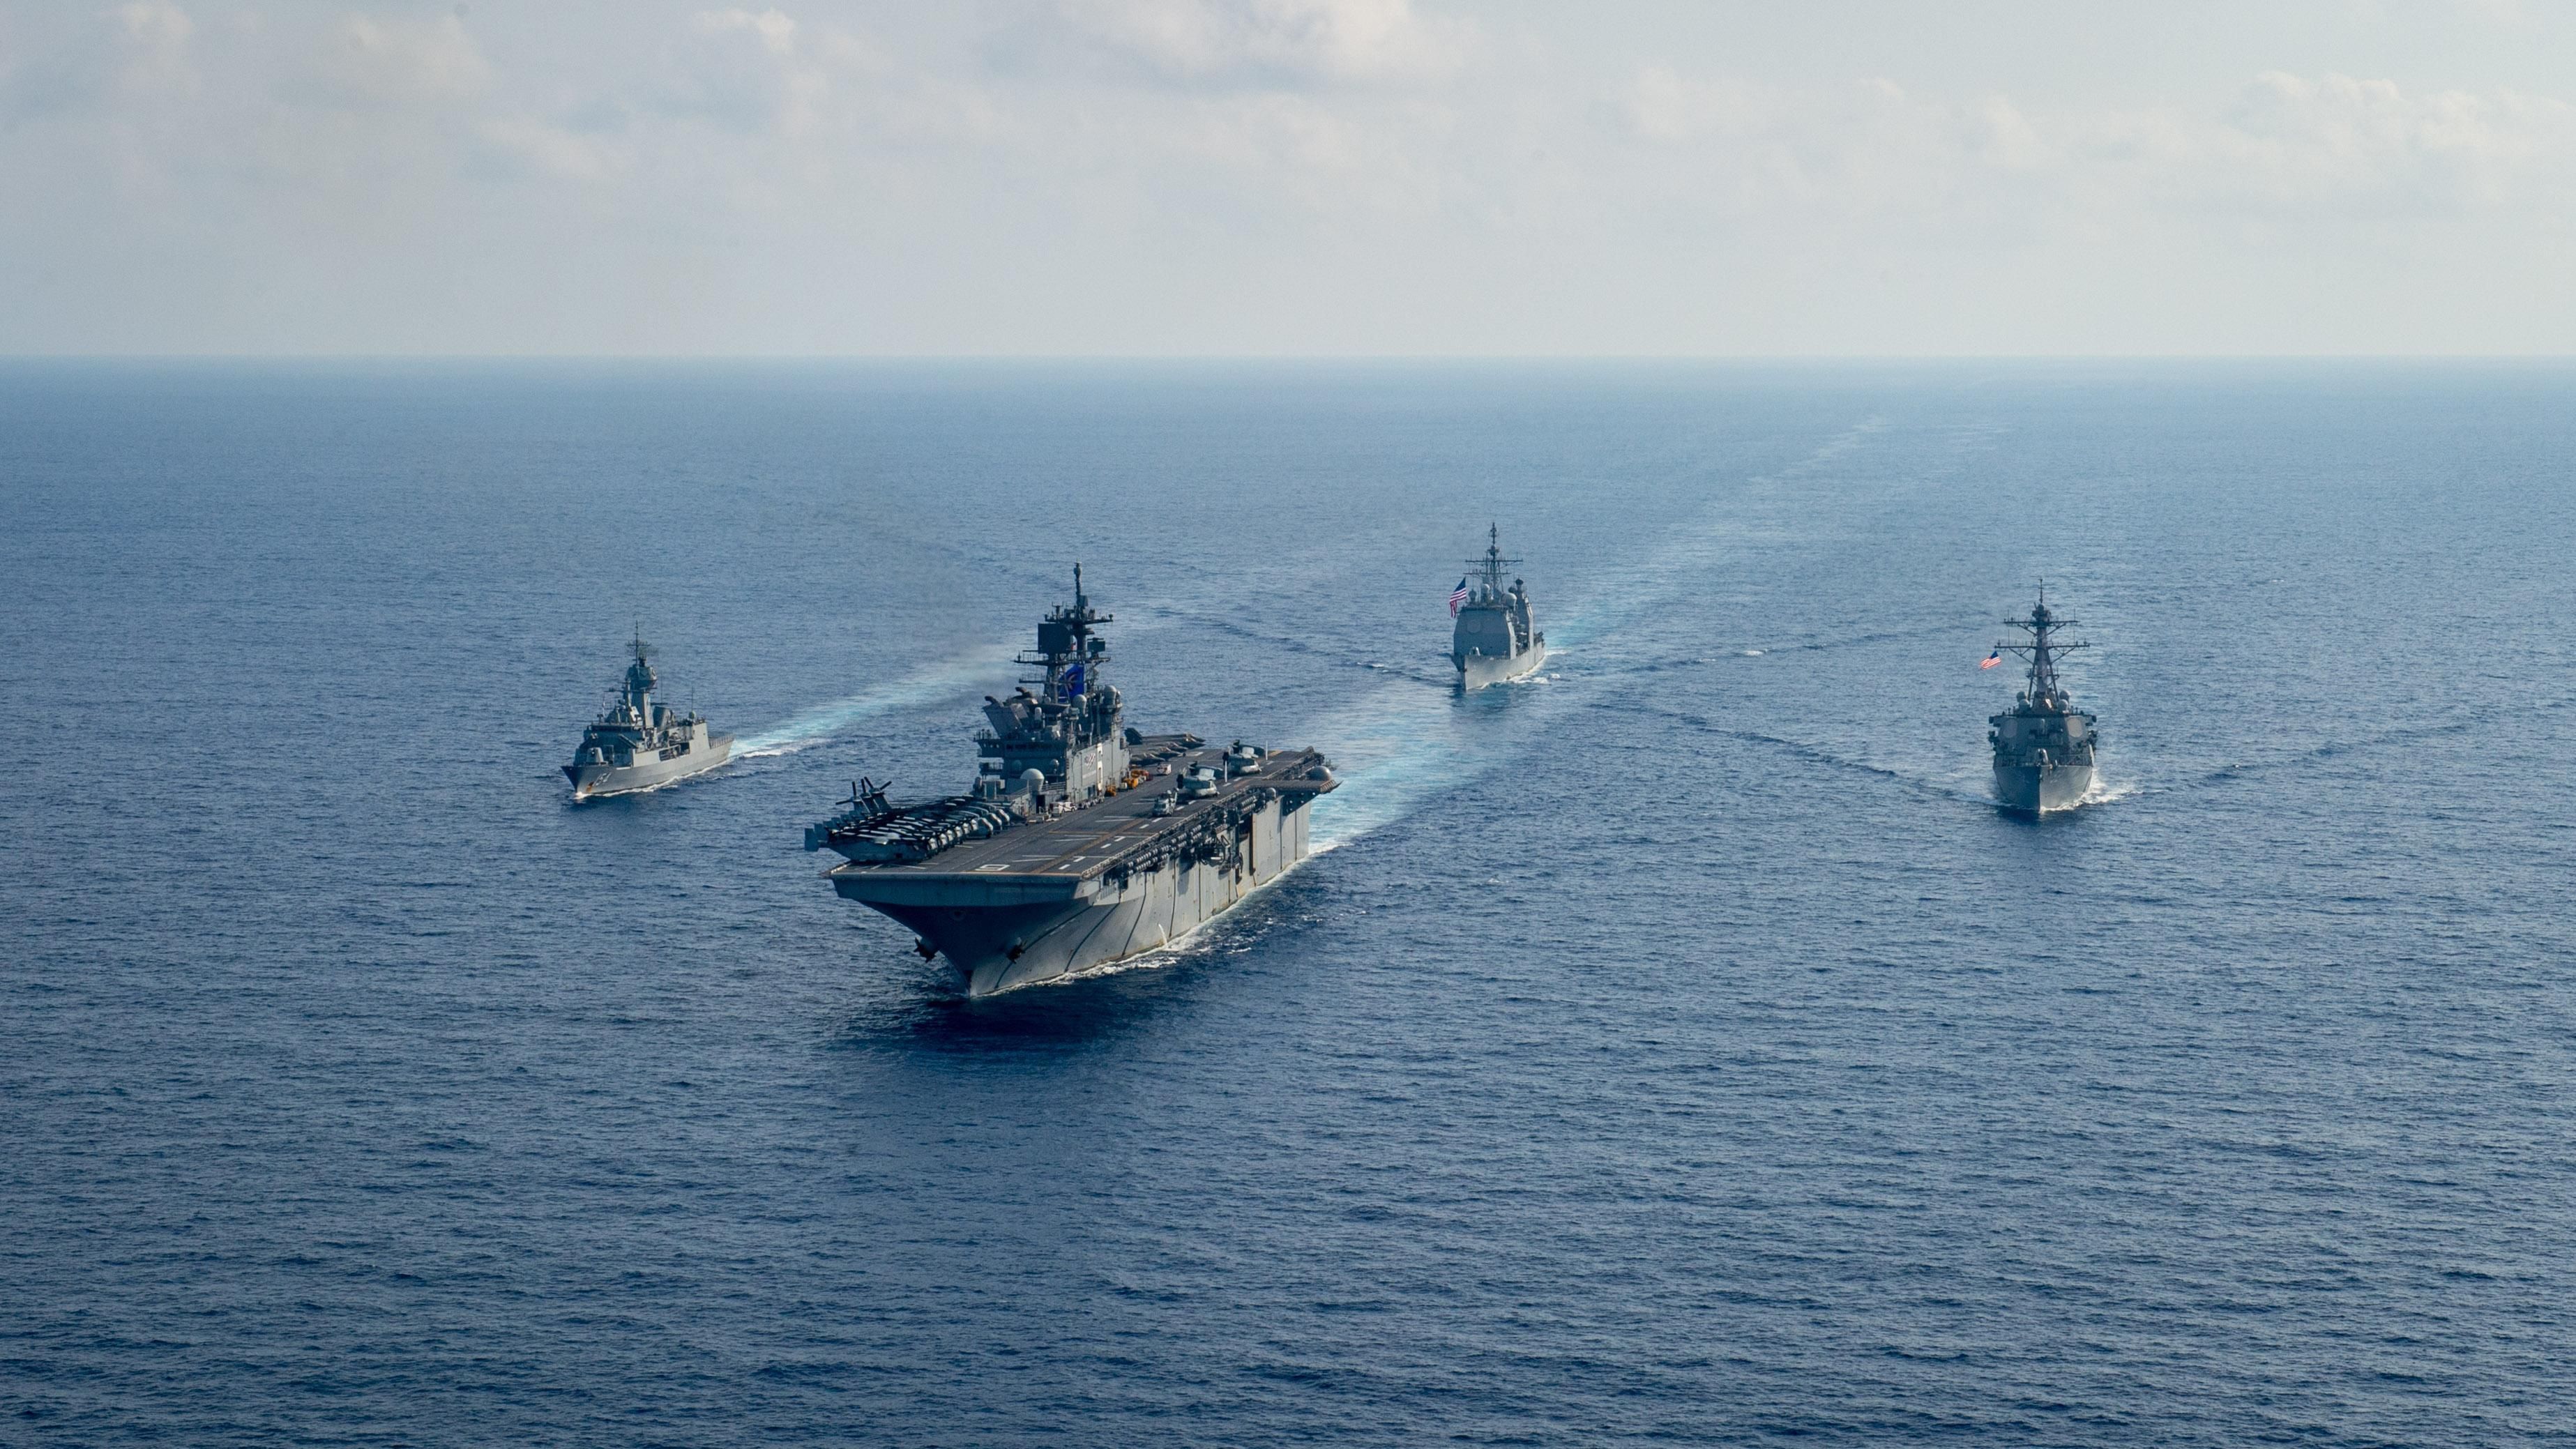 Royal Australian Navy guided-missile frigate HMAS Parramatta (FFH 154), left, sails with U.S. Navy Amphibious assault ship USS America (LHA 6), Ticonderoga-class guided-missile cruiser USS Bunker Hill (CG 52) and Arleigh-Burke class guided missile destroyer USS Barry (DDG 52). Bunker Hill is deployed to the U.S. 7th Fleet area of operations and is operating with the America Expeditionary Strike Group in support of security and stability in the Indo-Pacific region.